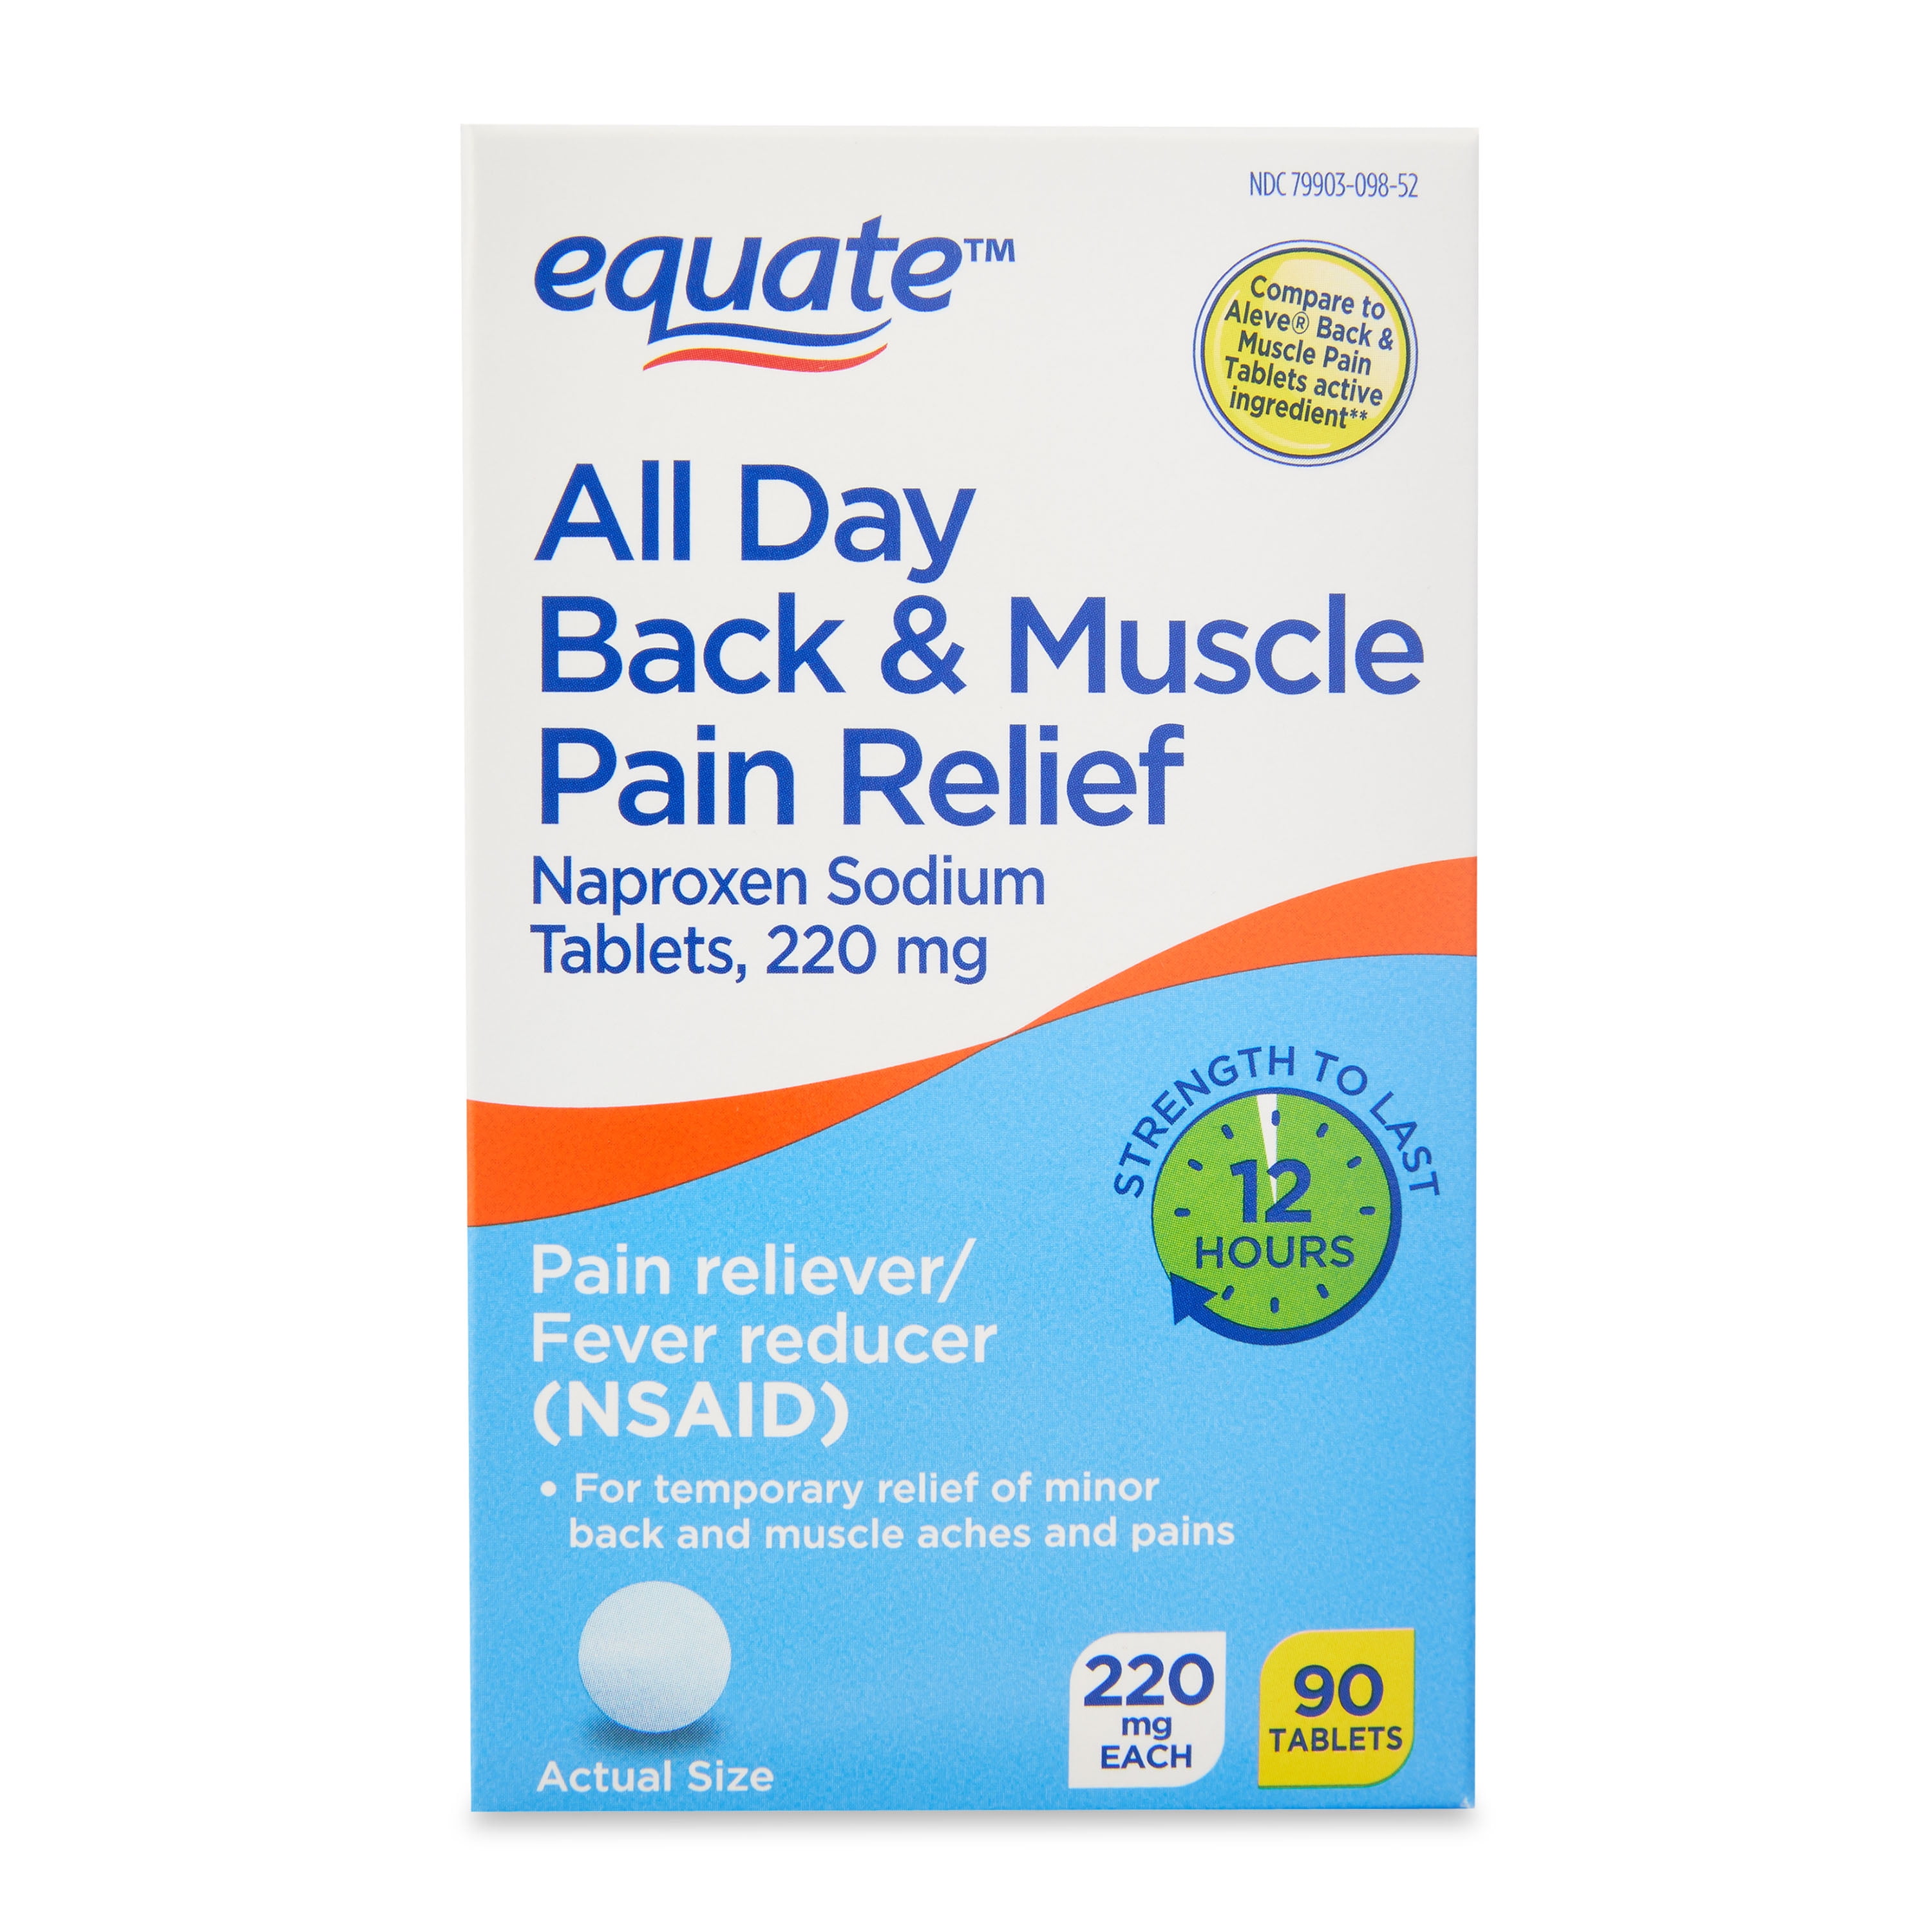 Equate All Day Back & Muscle Pain Relief Naproxen Sodium Tablets, 220mg, 90 Count